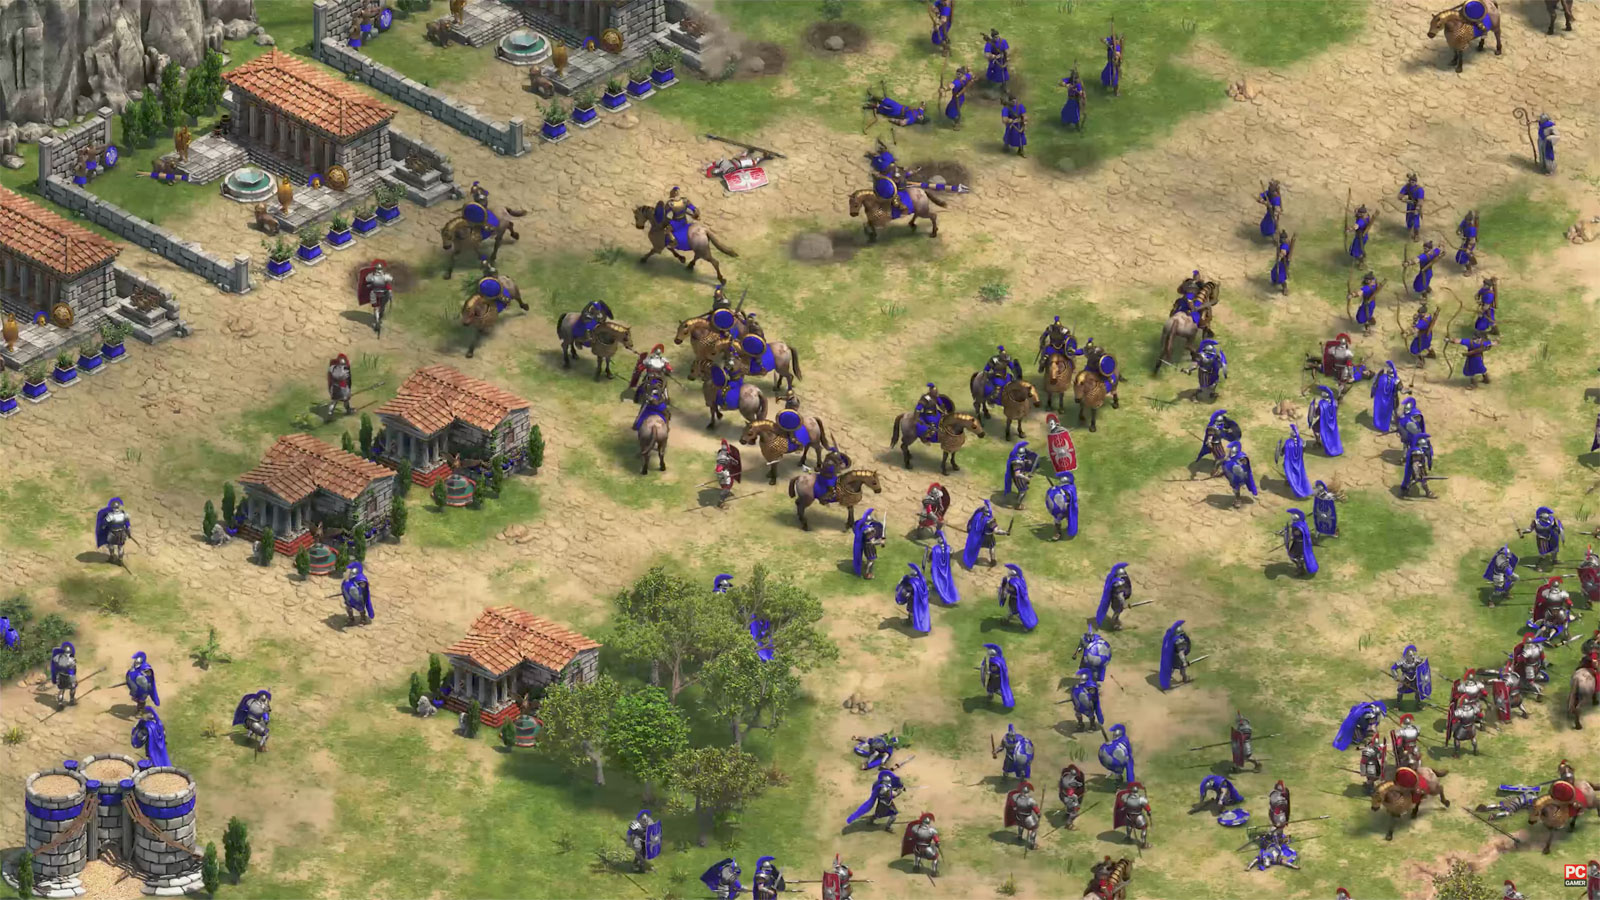 age of empires 2 iso image download